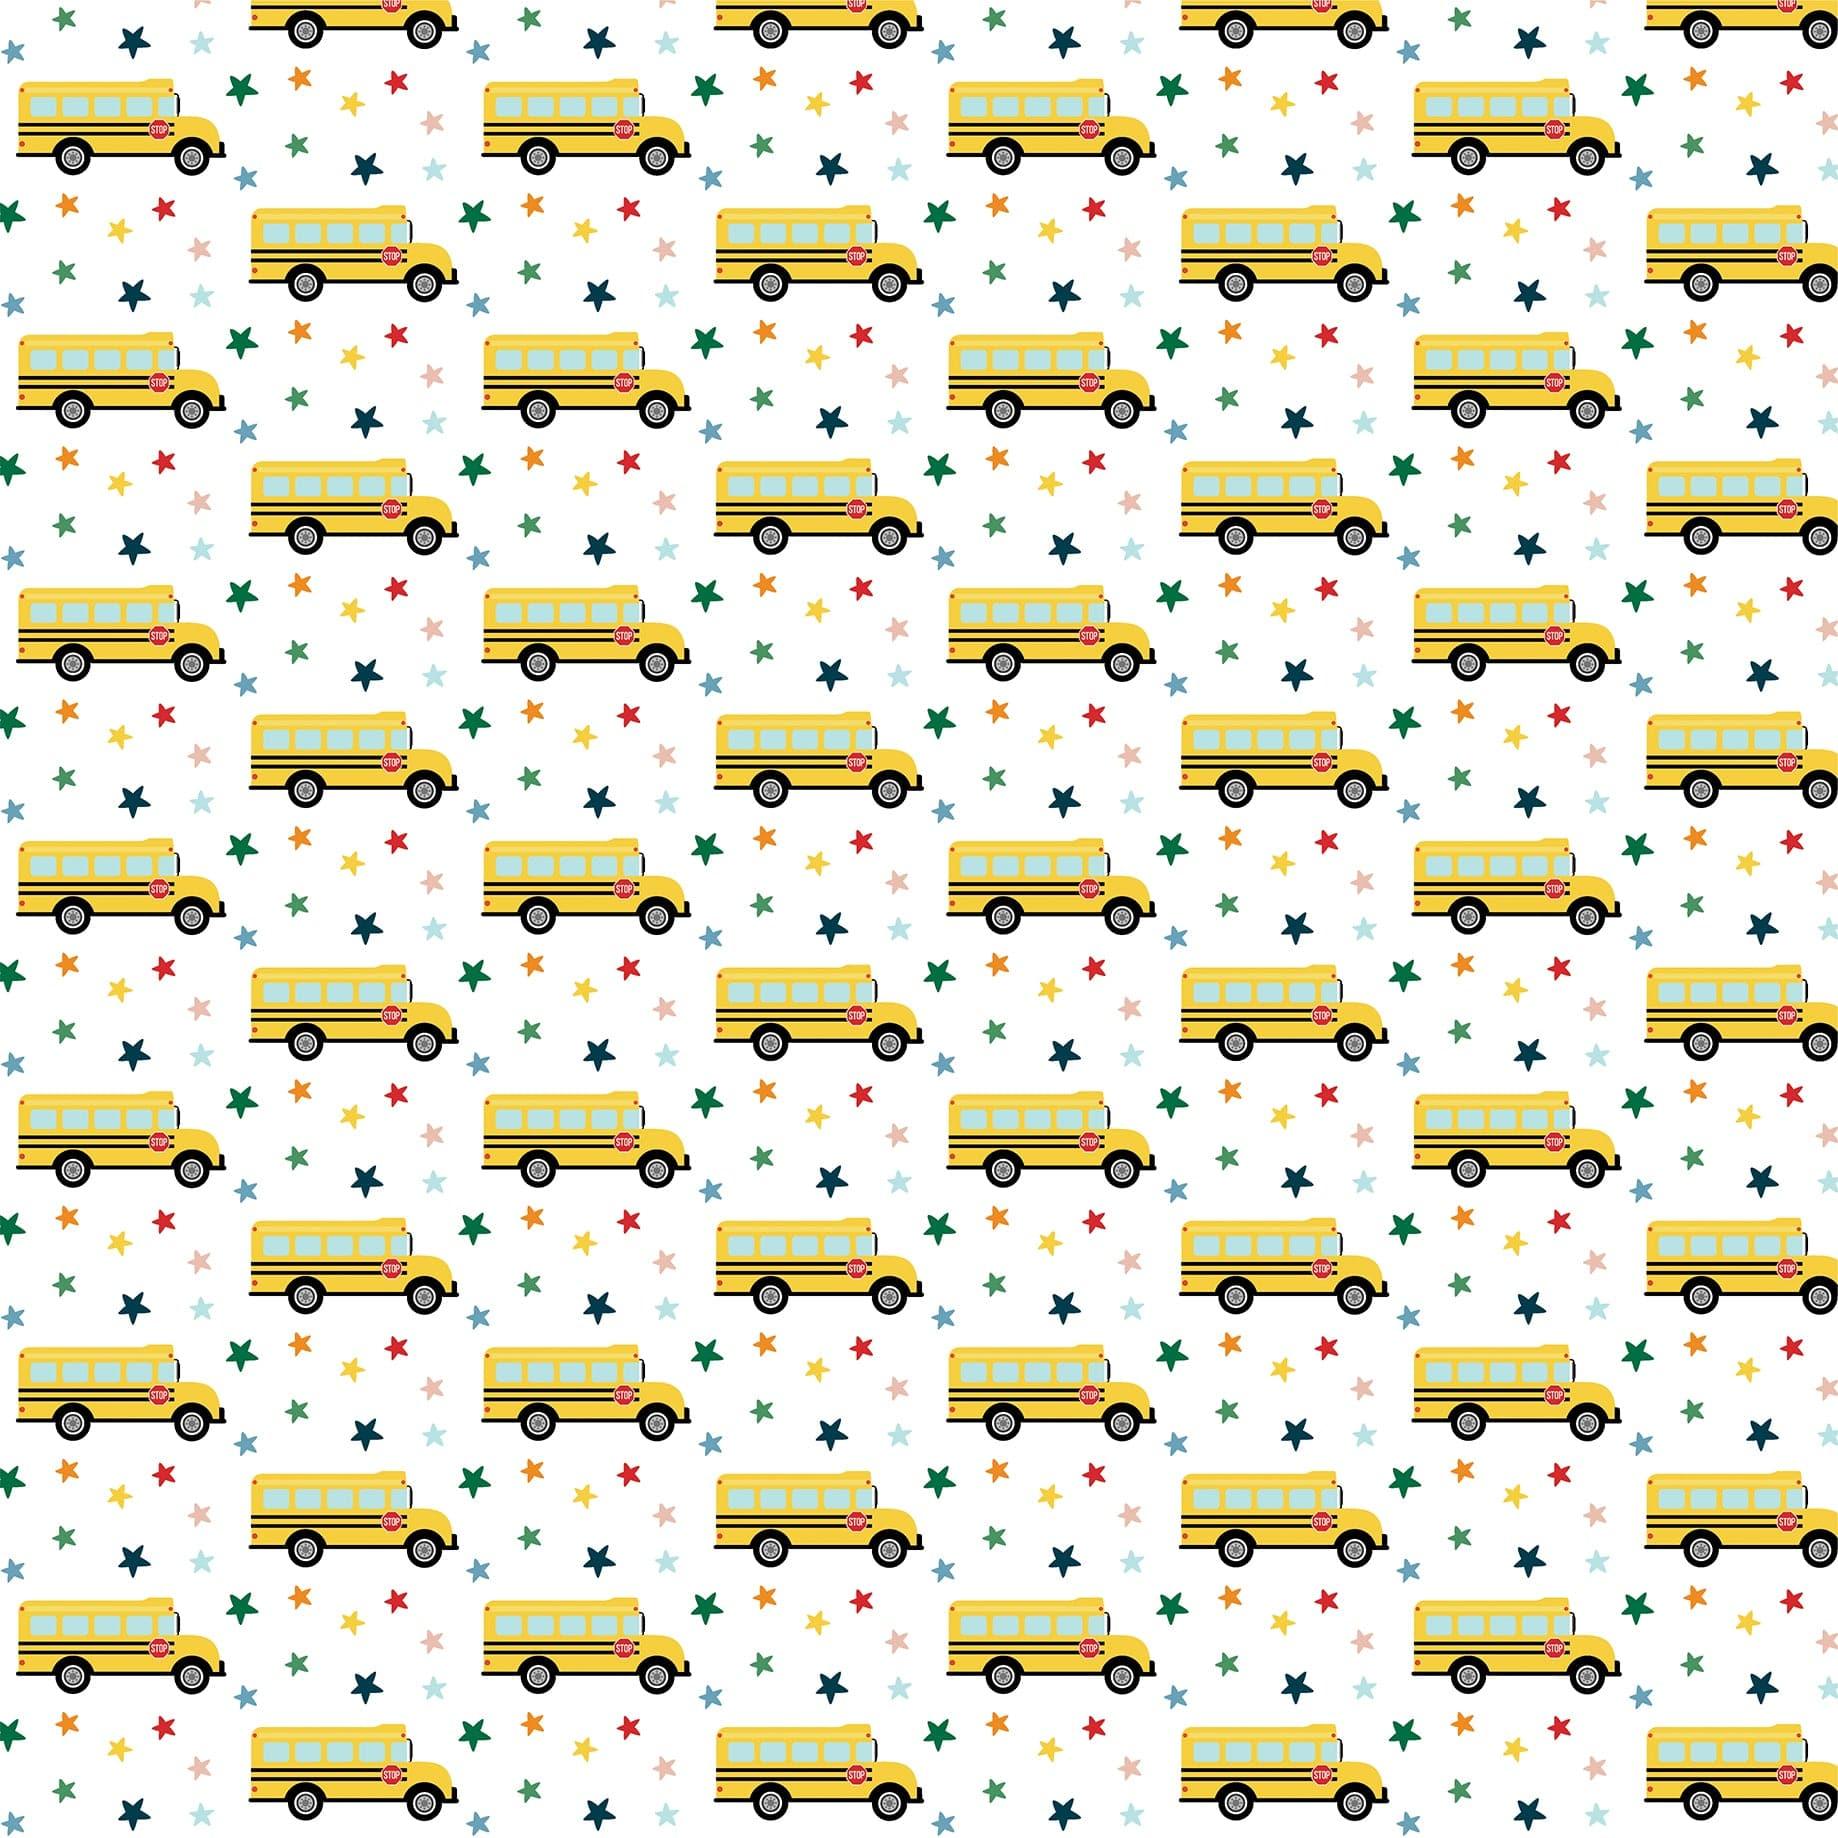 First Day Of School Collection Bus Stop 12 x 12 Double-Sided Scrapbook Paper by Echo Park Paper - Scrapbook Supply Companies